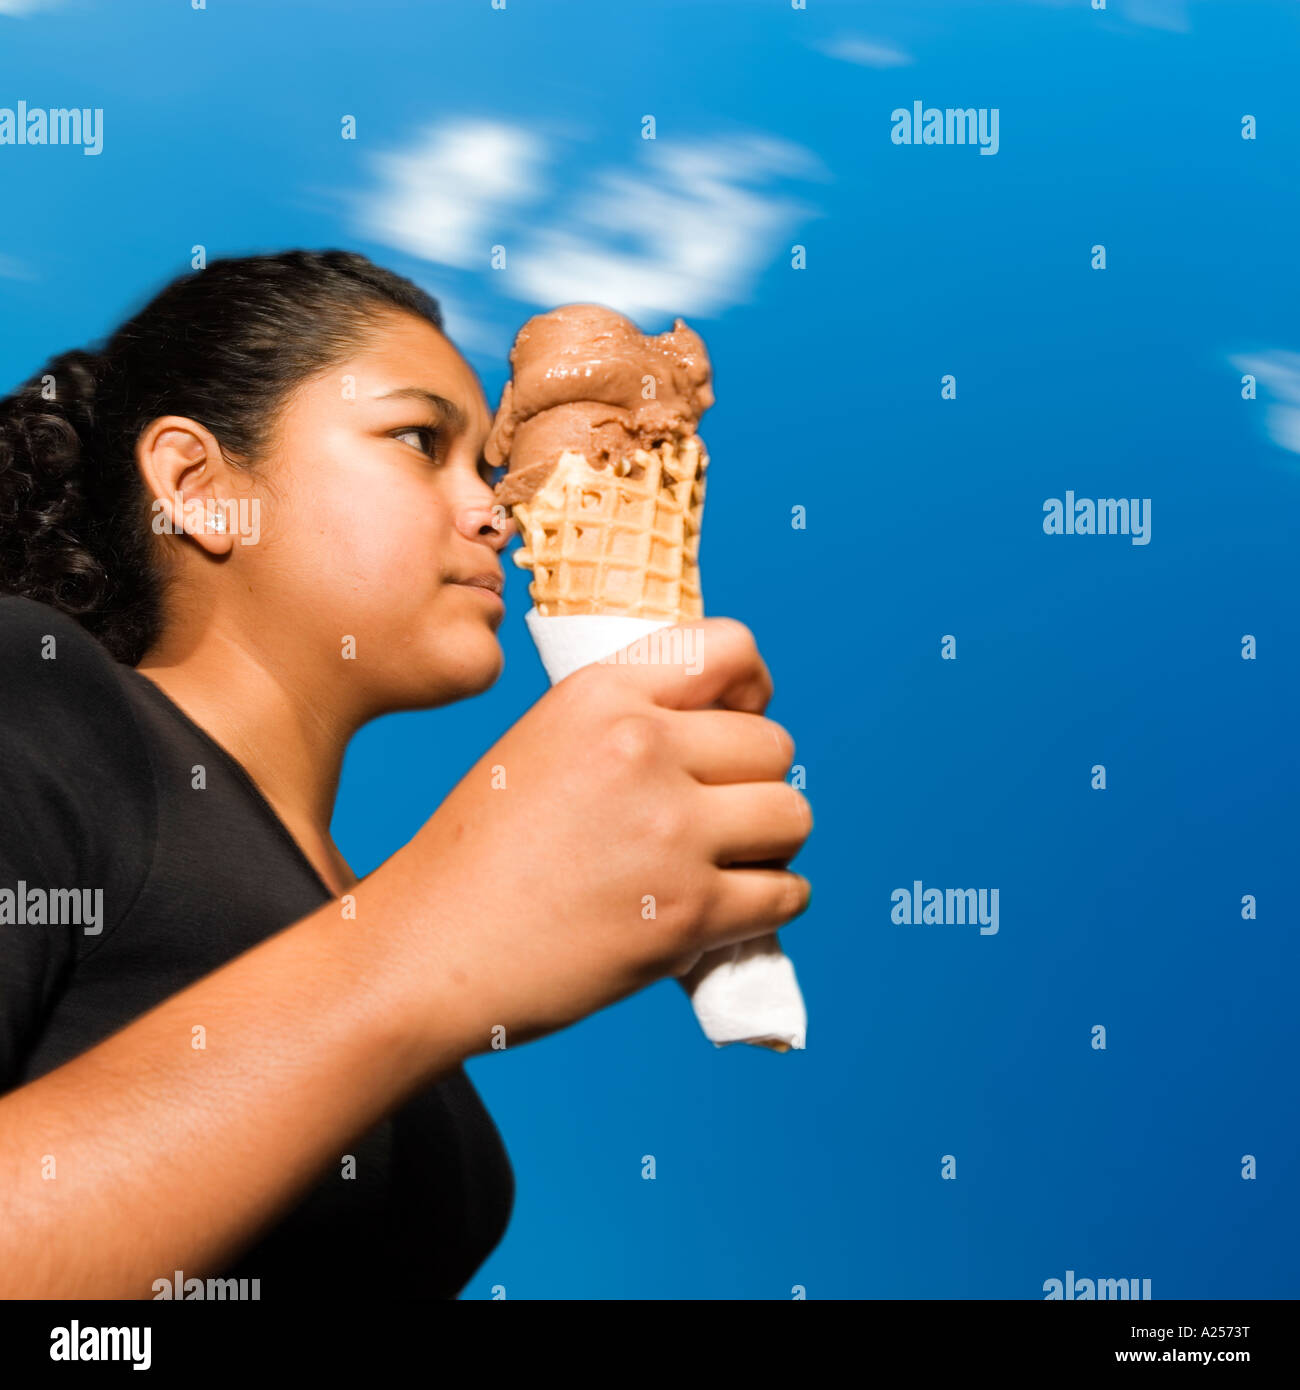 Girl walking by eating ice-cream on the streets of downtown Mazatlan Mexico Stock Photo